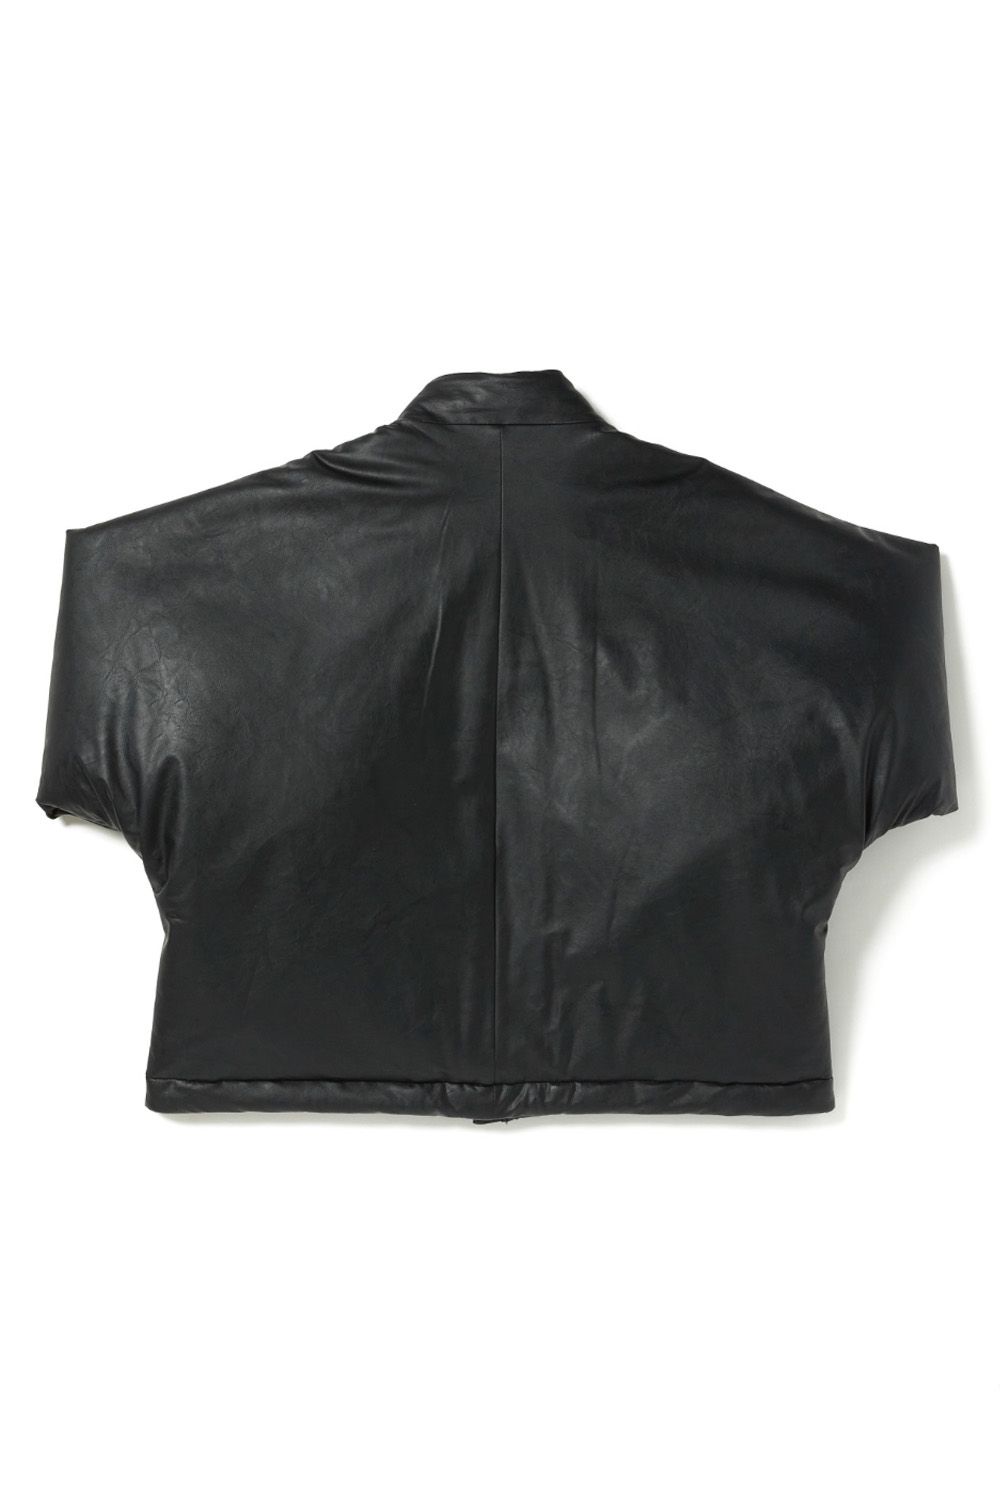 N.HOOLYWOOD - N.HOOLYWOOD COMPILE STAND COLLAR BLOUSON / エヌ 